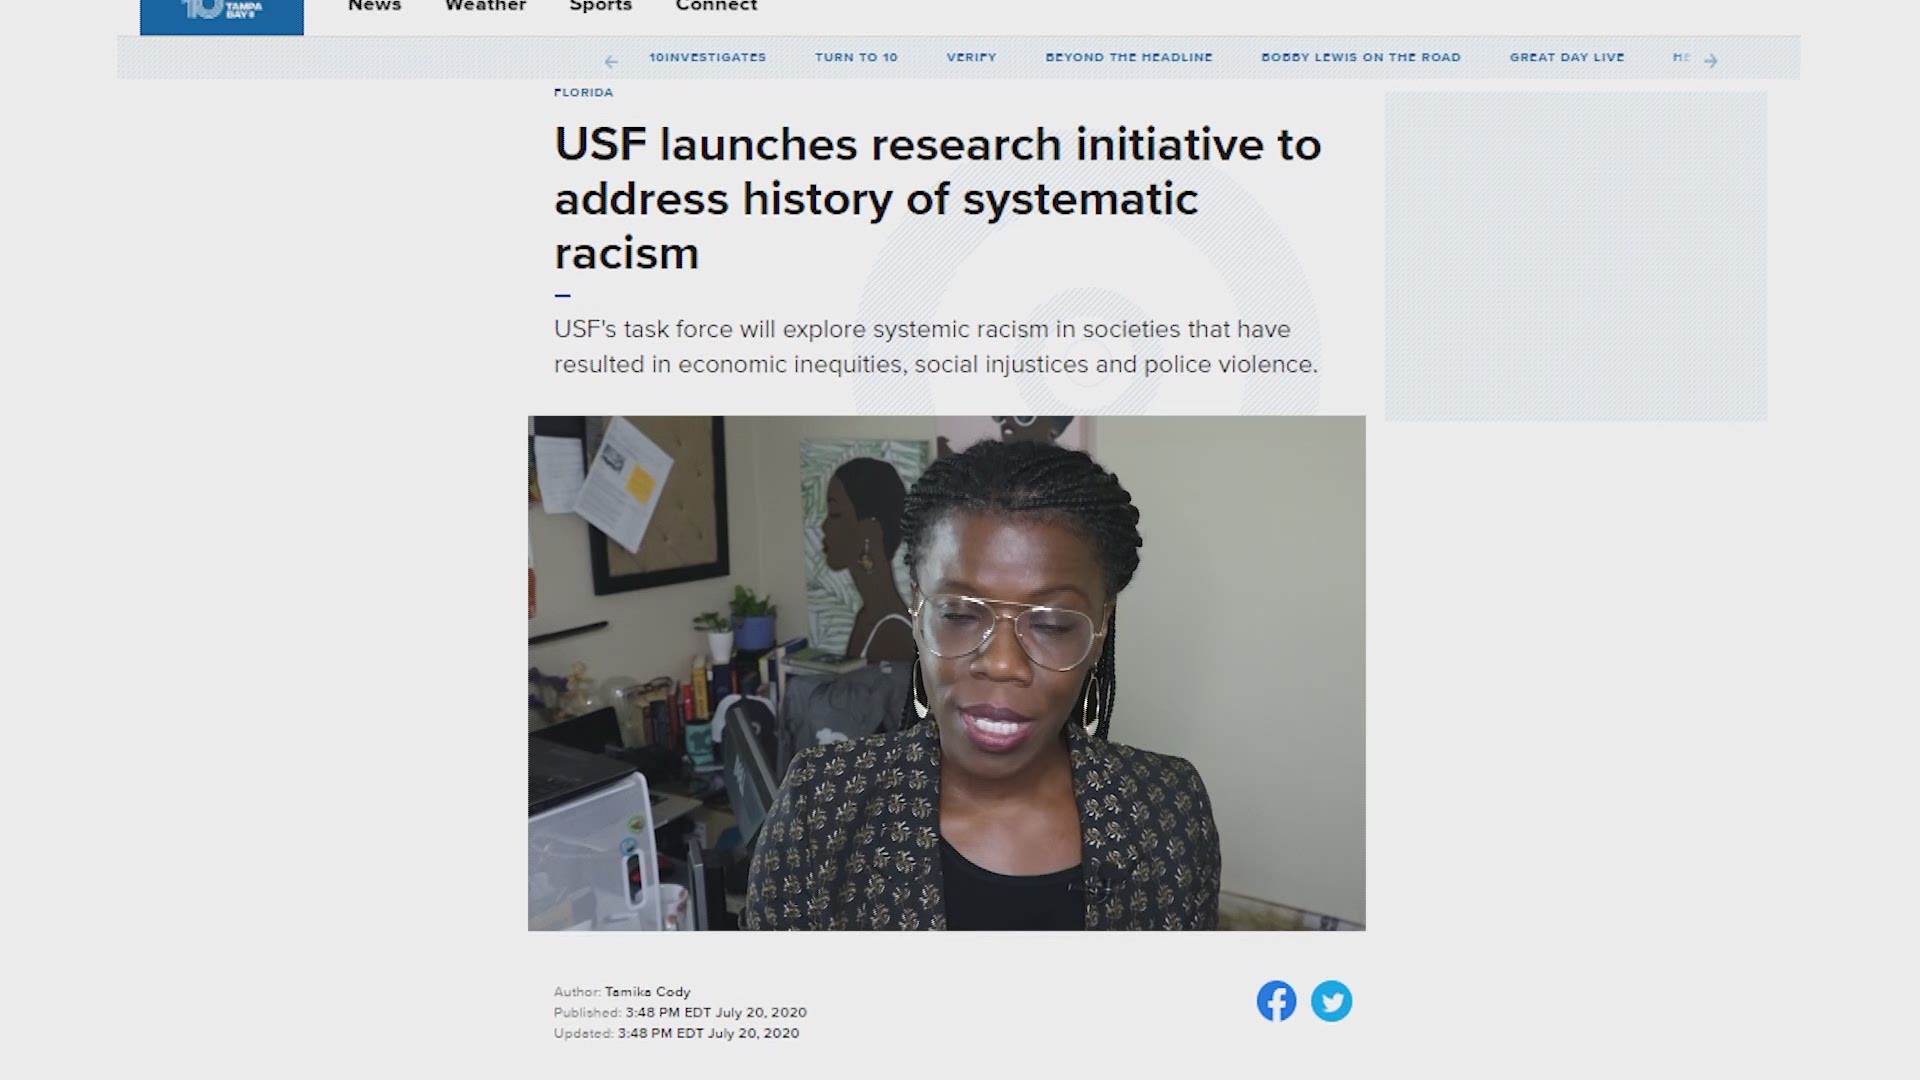 USF's task force will explore systemic racism in societies that have resulted in economic inequities, social injustices and police violence.